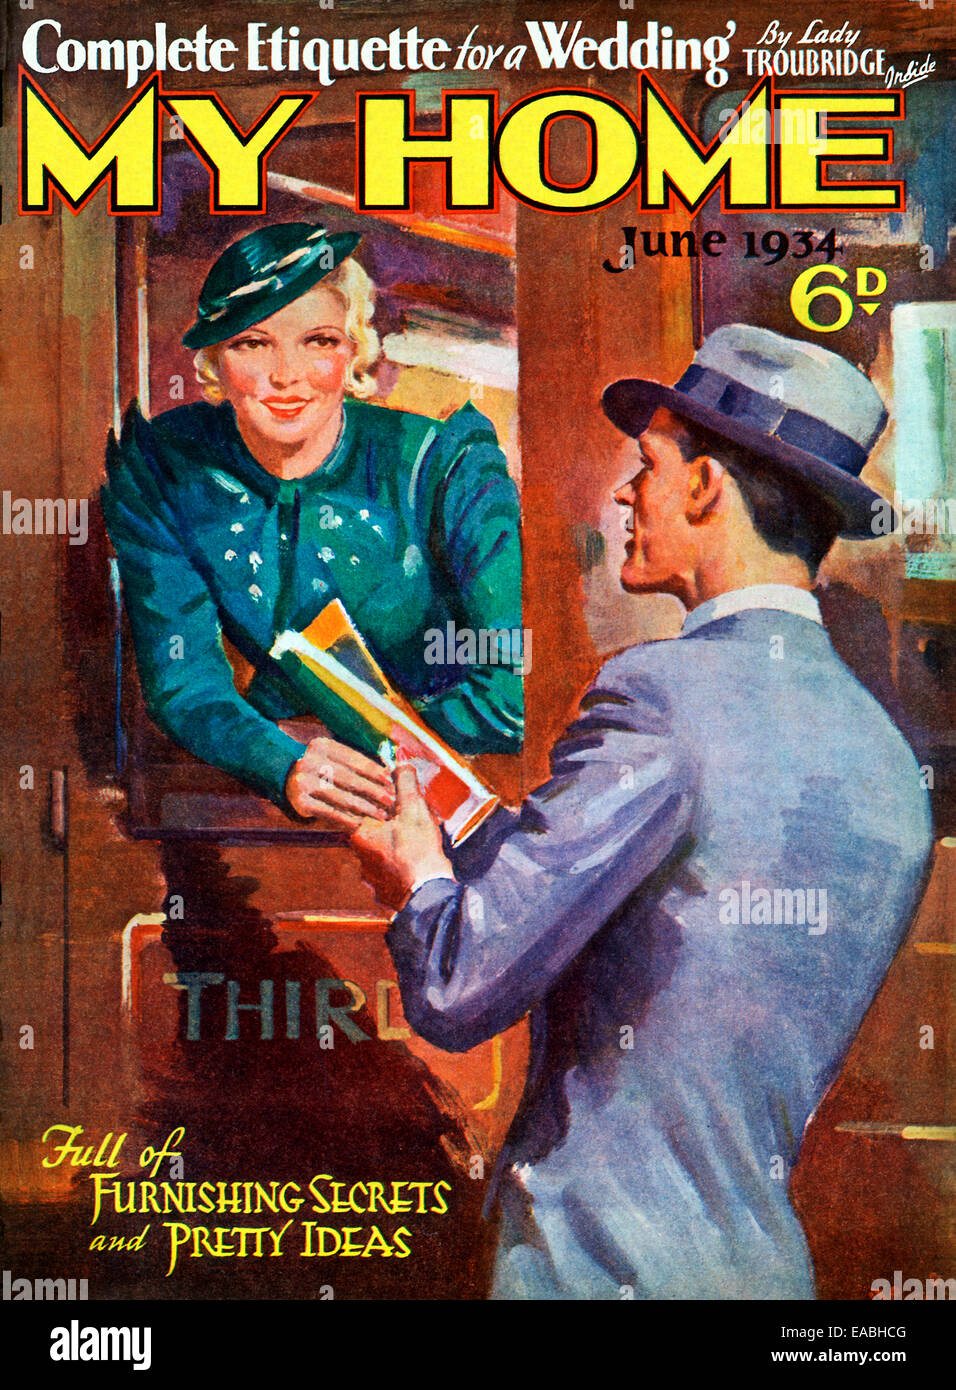 My Home, Railway Train, 1934 cover of the English home and lifestyle magazine for the new suburban middle class, seeing her off at the railway station Stock Photo